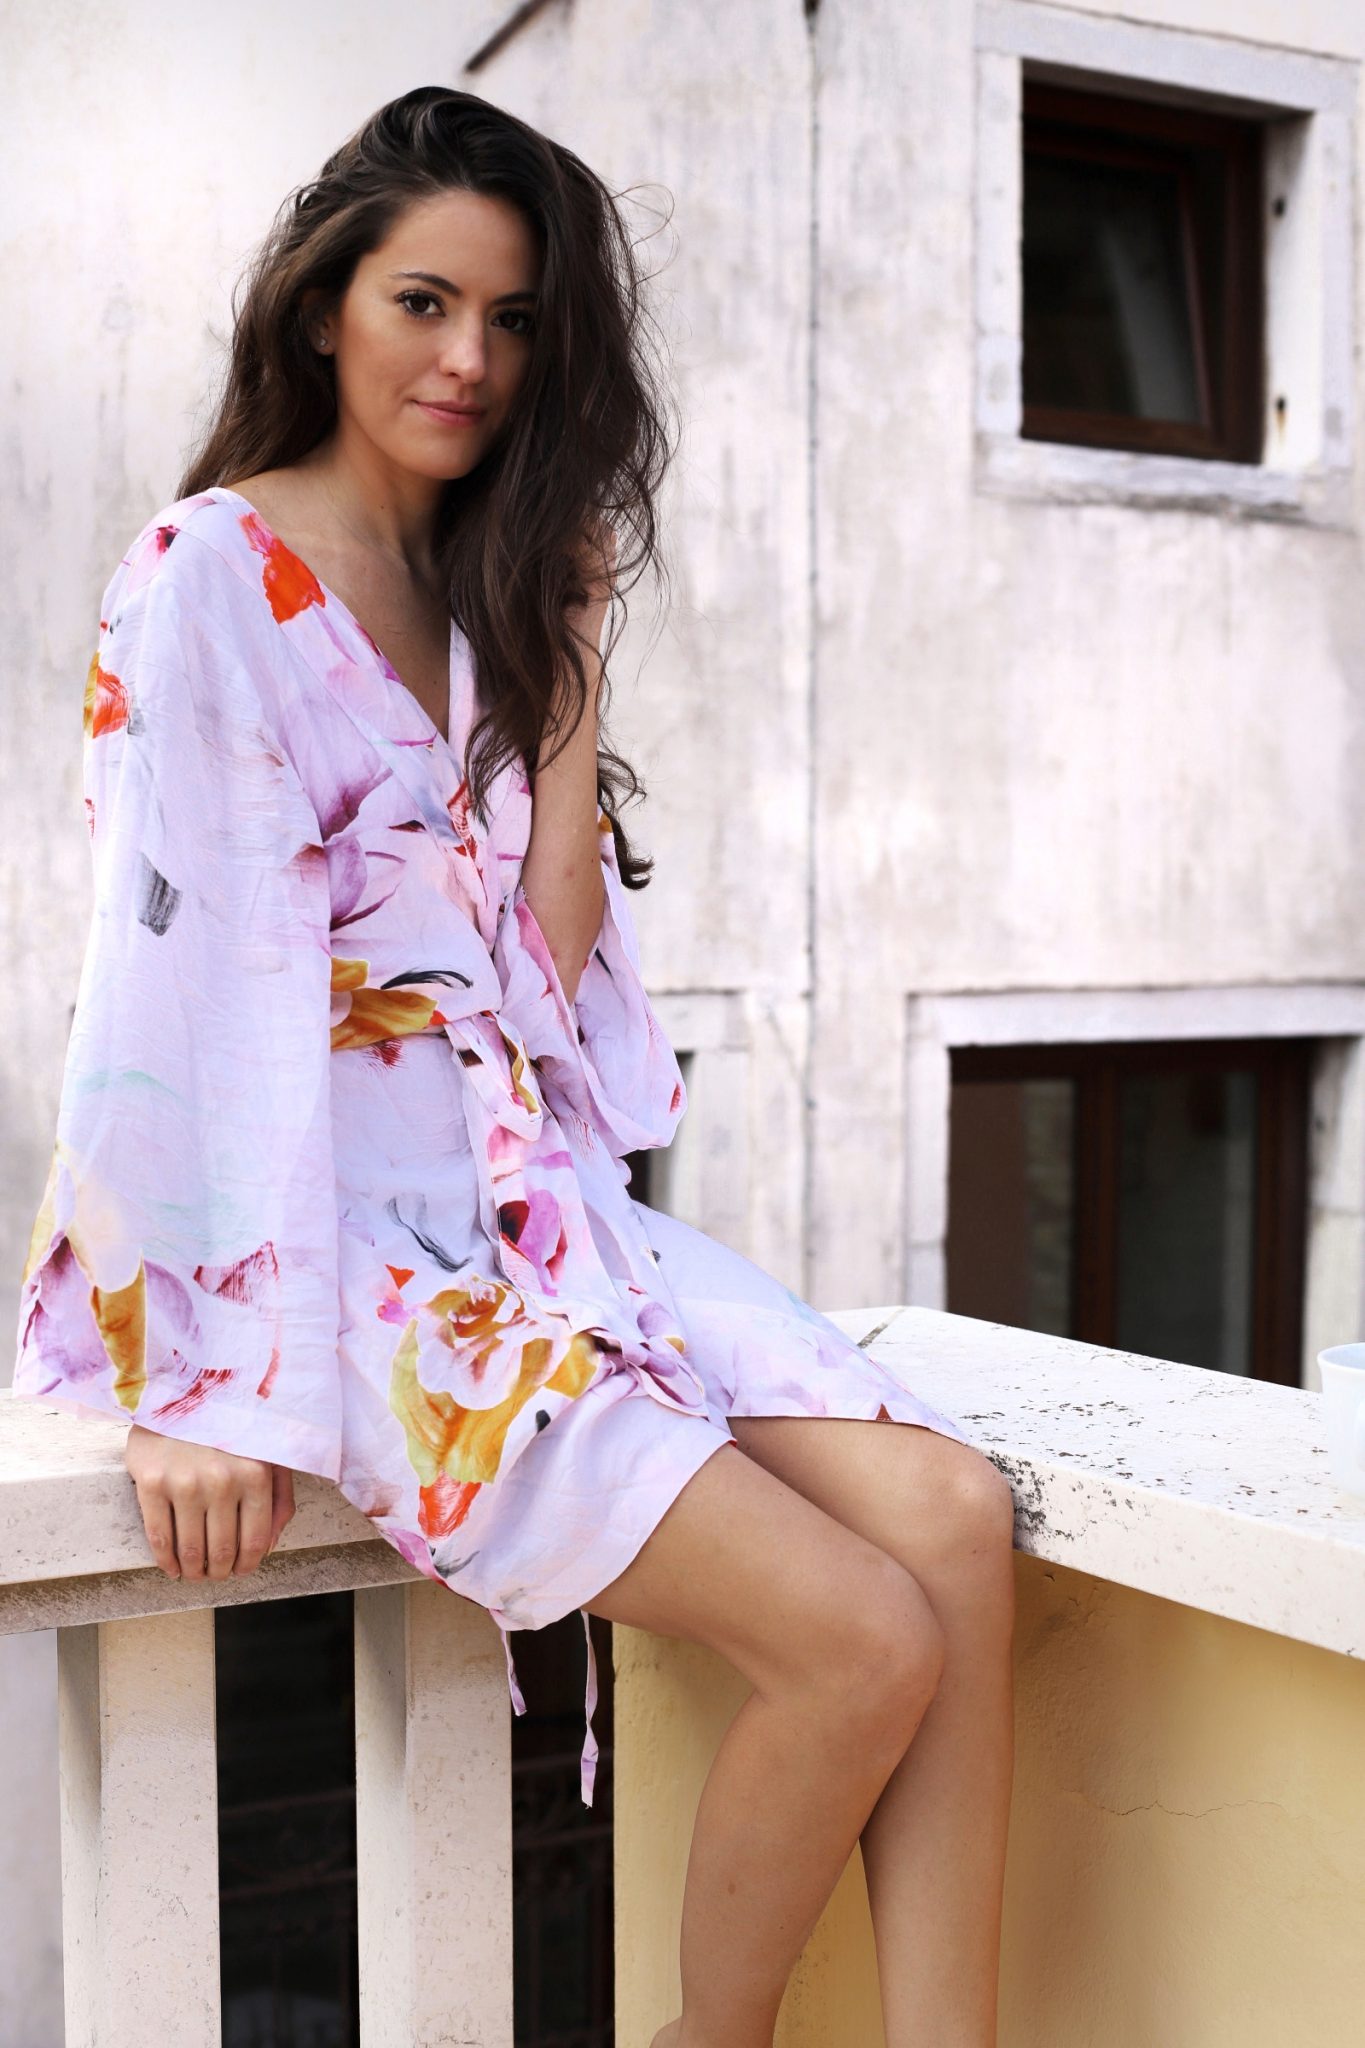 Best friends in Europe, Eurotrip, Venice, Venice Italy, European lifestyle, cute robes for bridesmaids, cute matching robes, floral robes, plum pretty sugar KIMONO STYLE. KNEE LENGTH ROBE. SHANGRI-LA., plum pretty sugar shangri-la kimono style robe, morning coffee, coffeenclothes